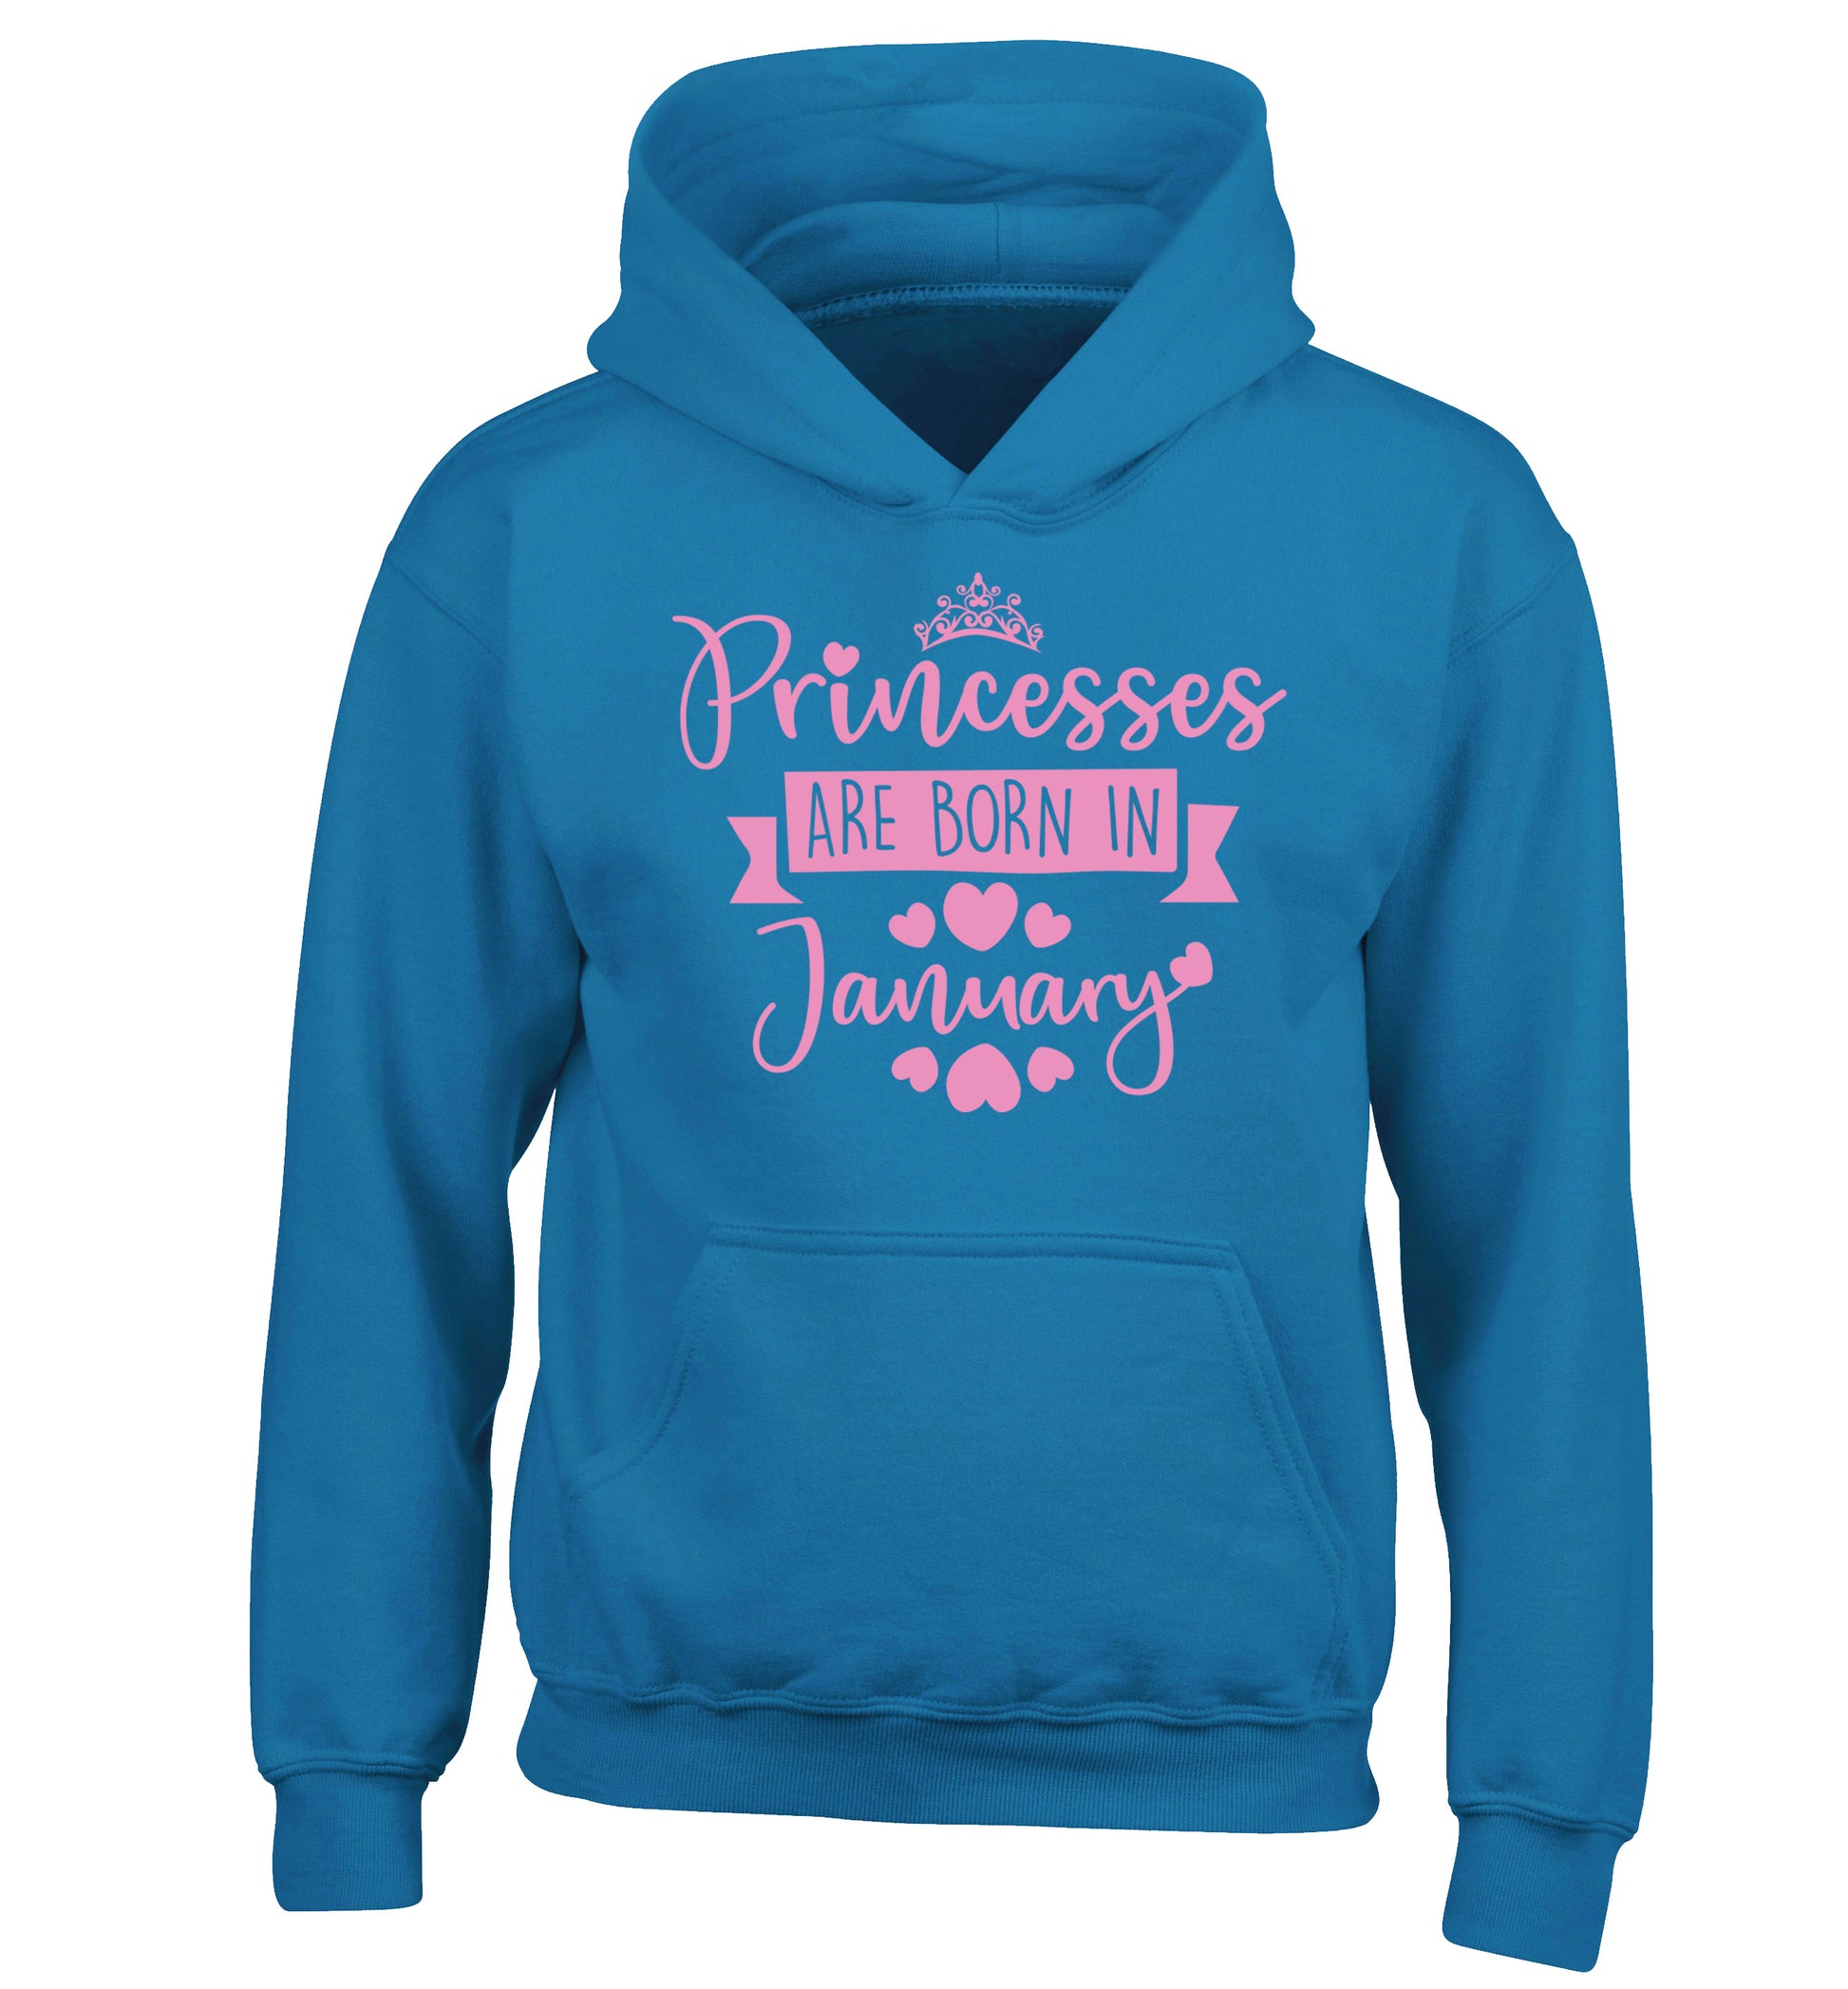 Princesses are born in November children's blue hoodie 12-13 Years